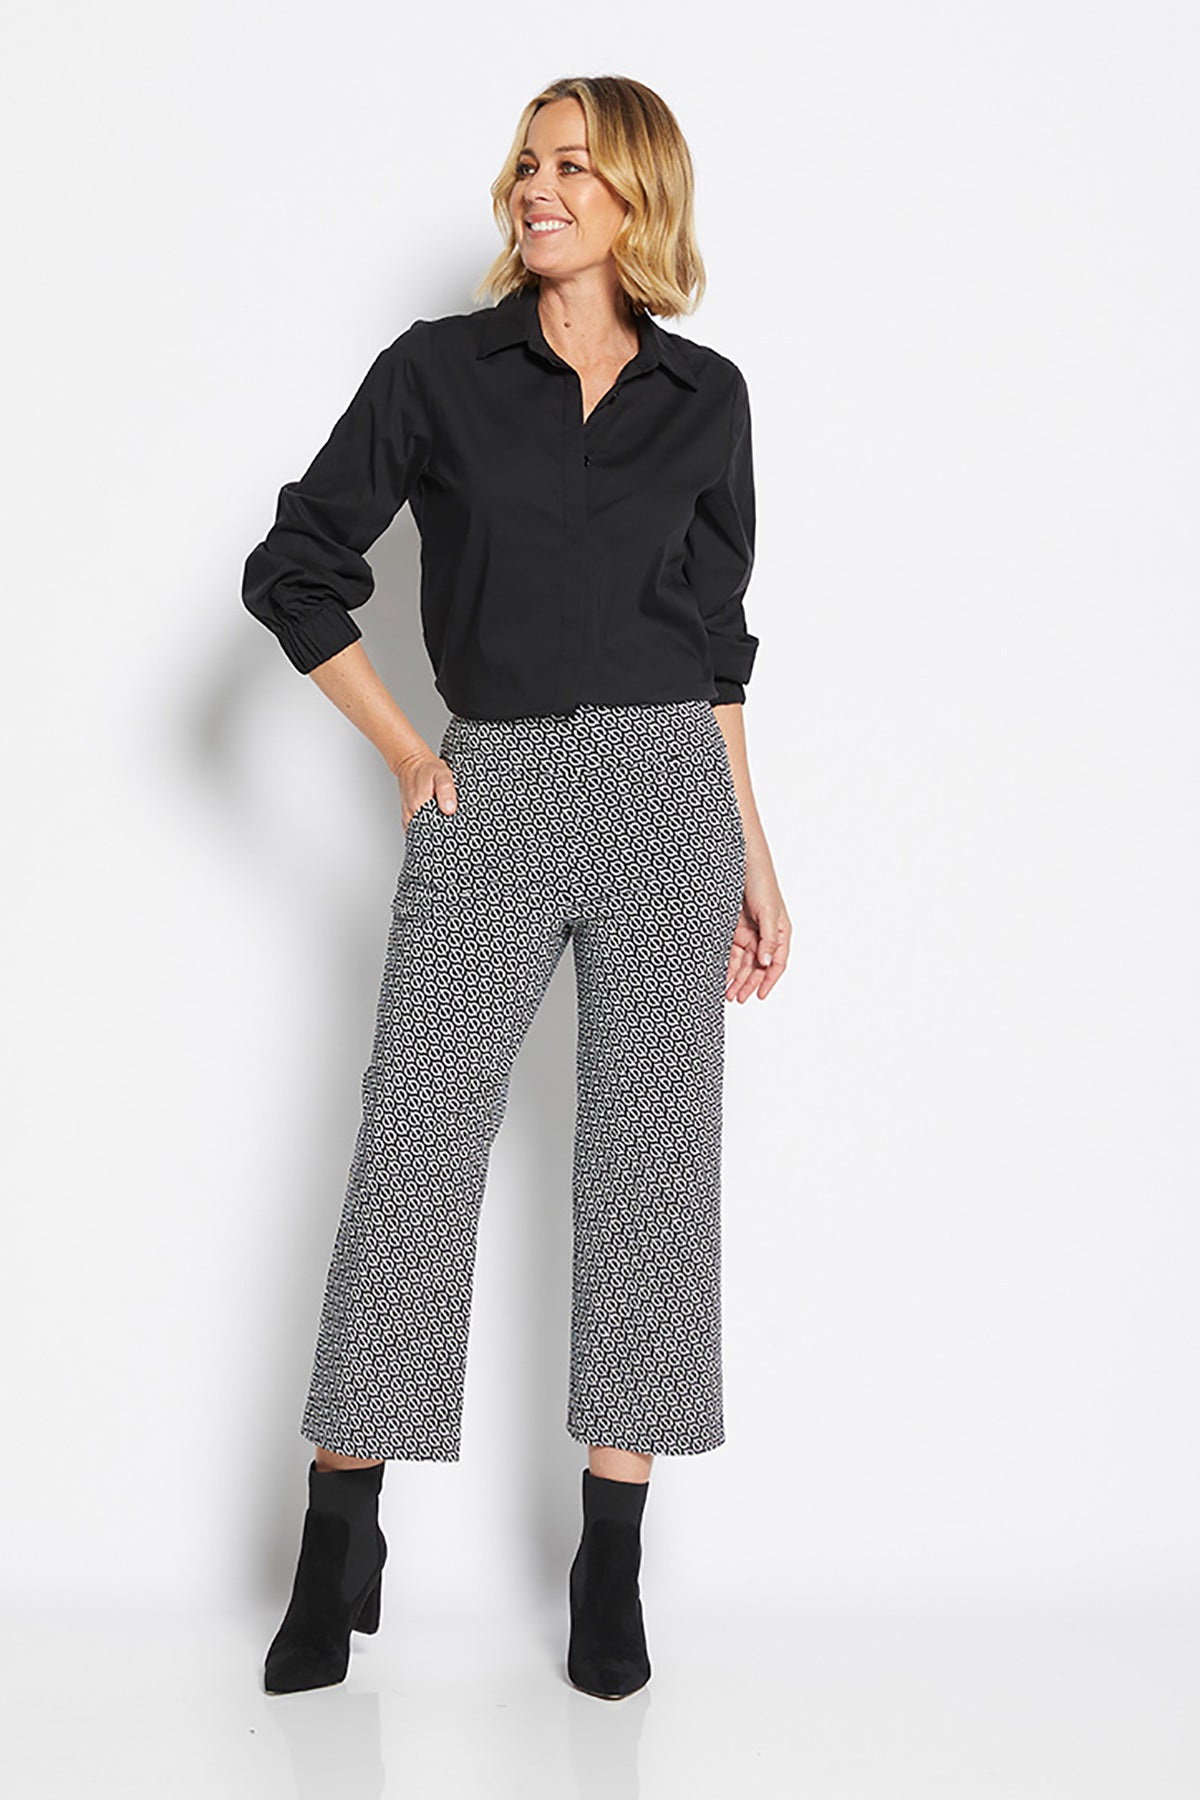 ticket culotte pant by philosophy Australia 